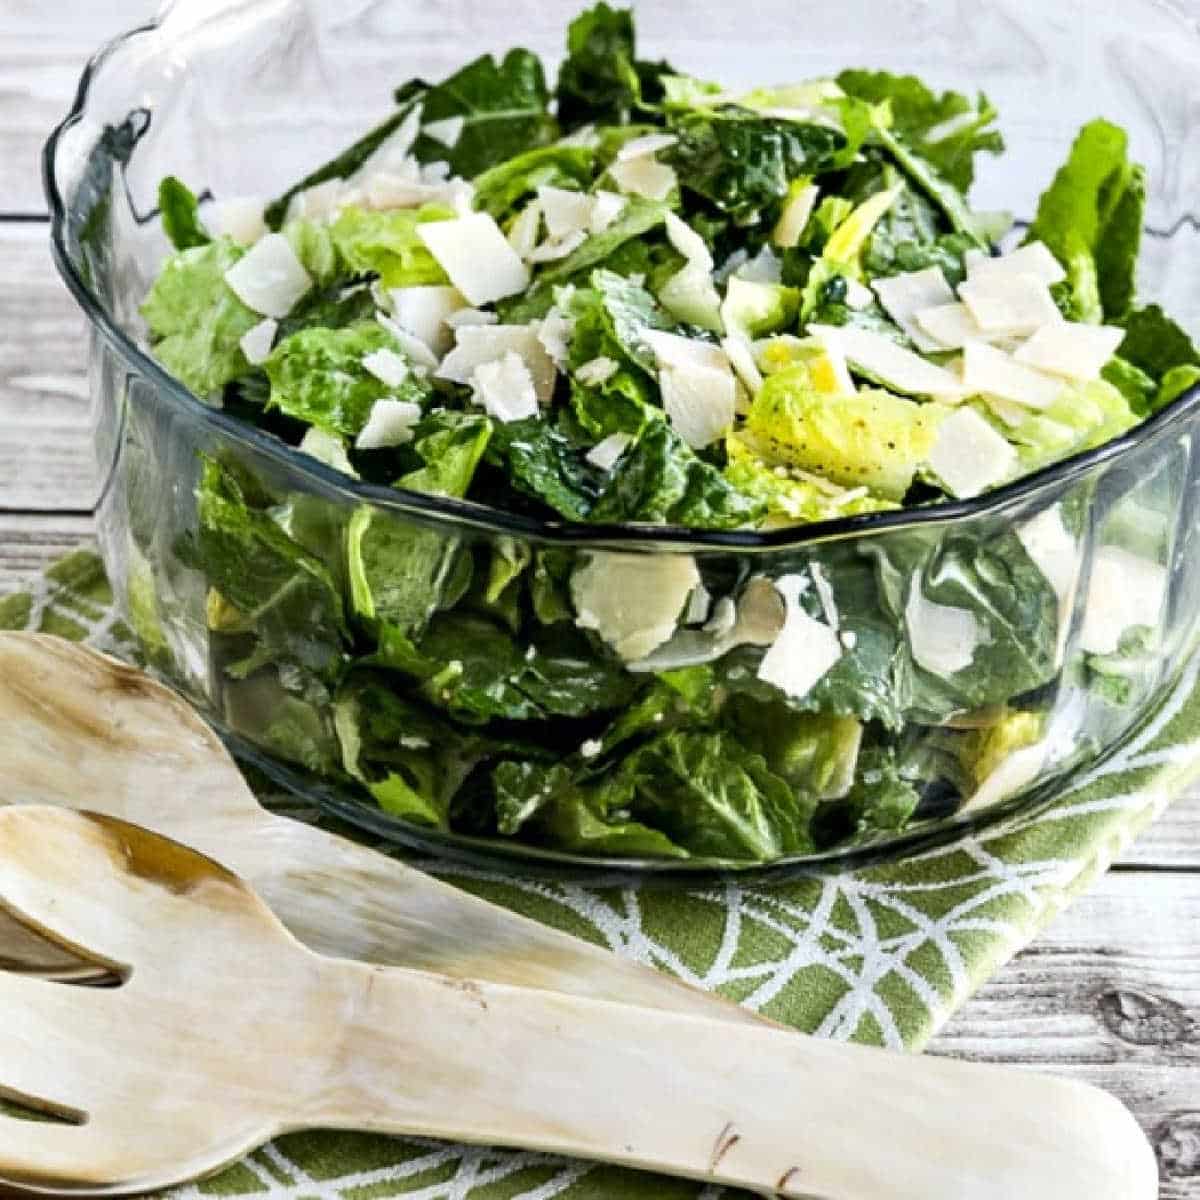 Caesar Salad with Kale, Romaine, and Shaved Parmesan shown in glass serving bowl with forks